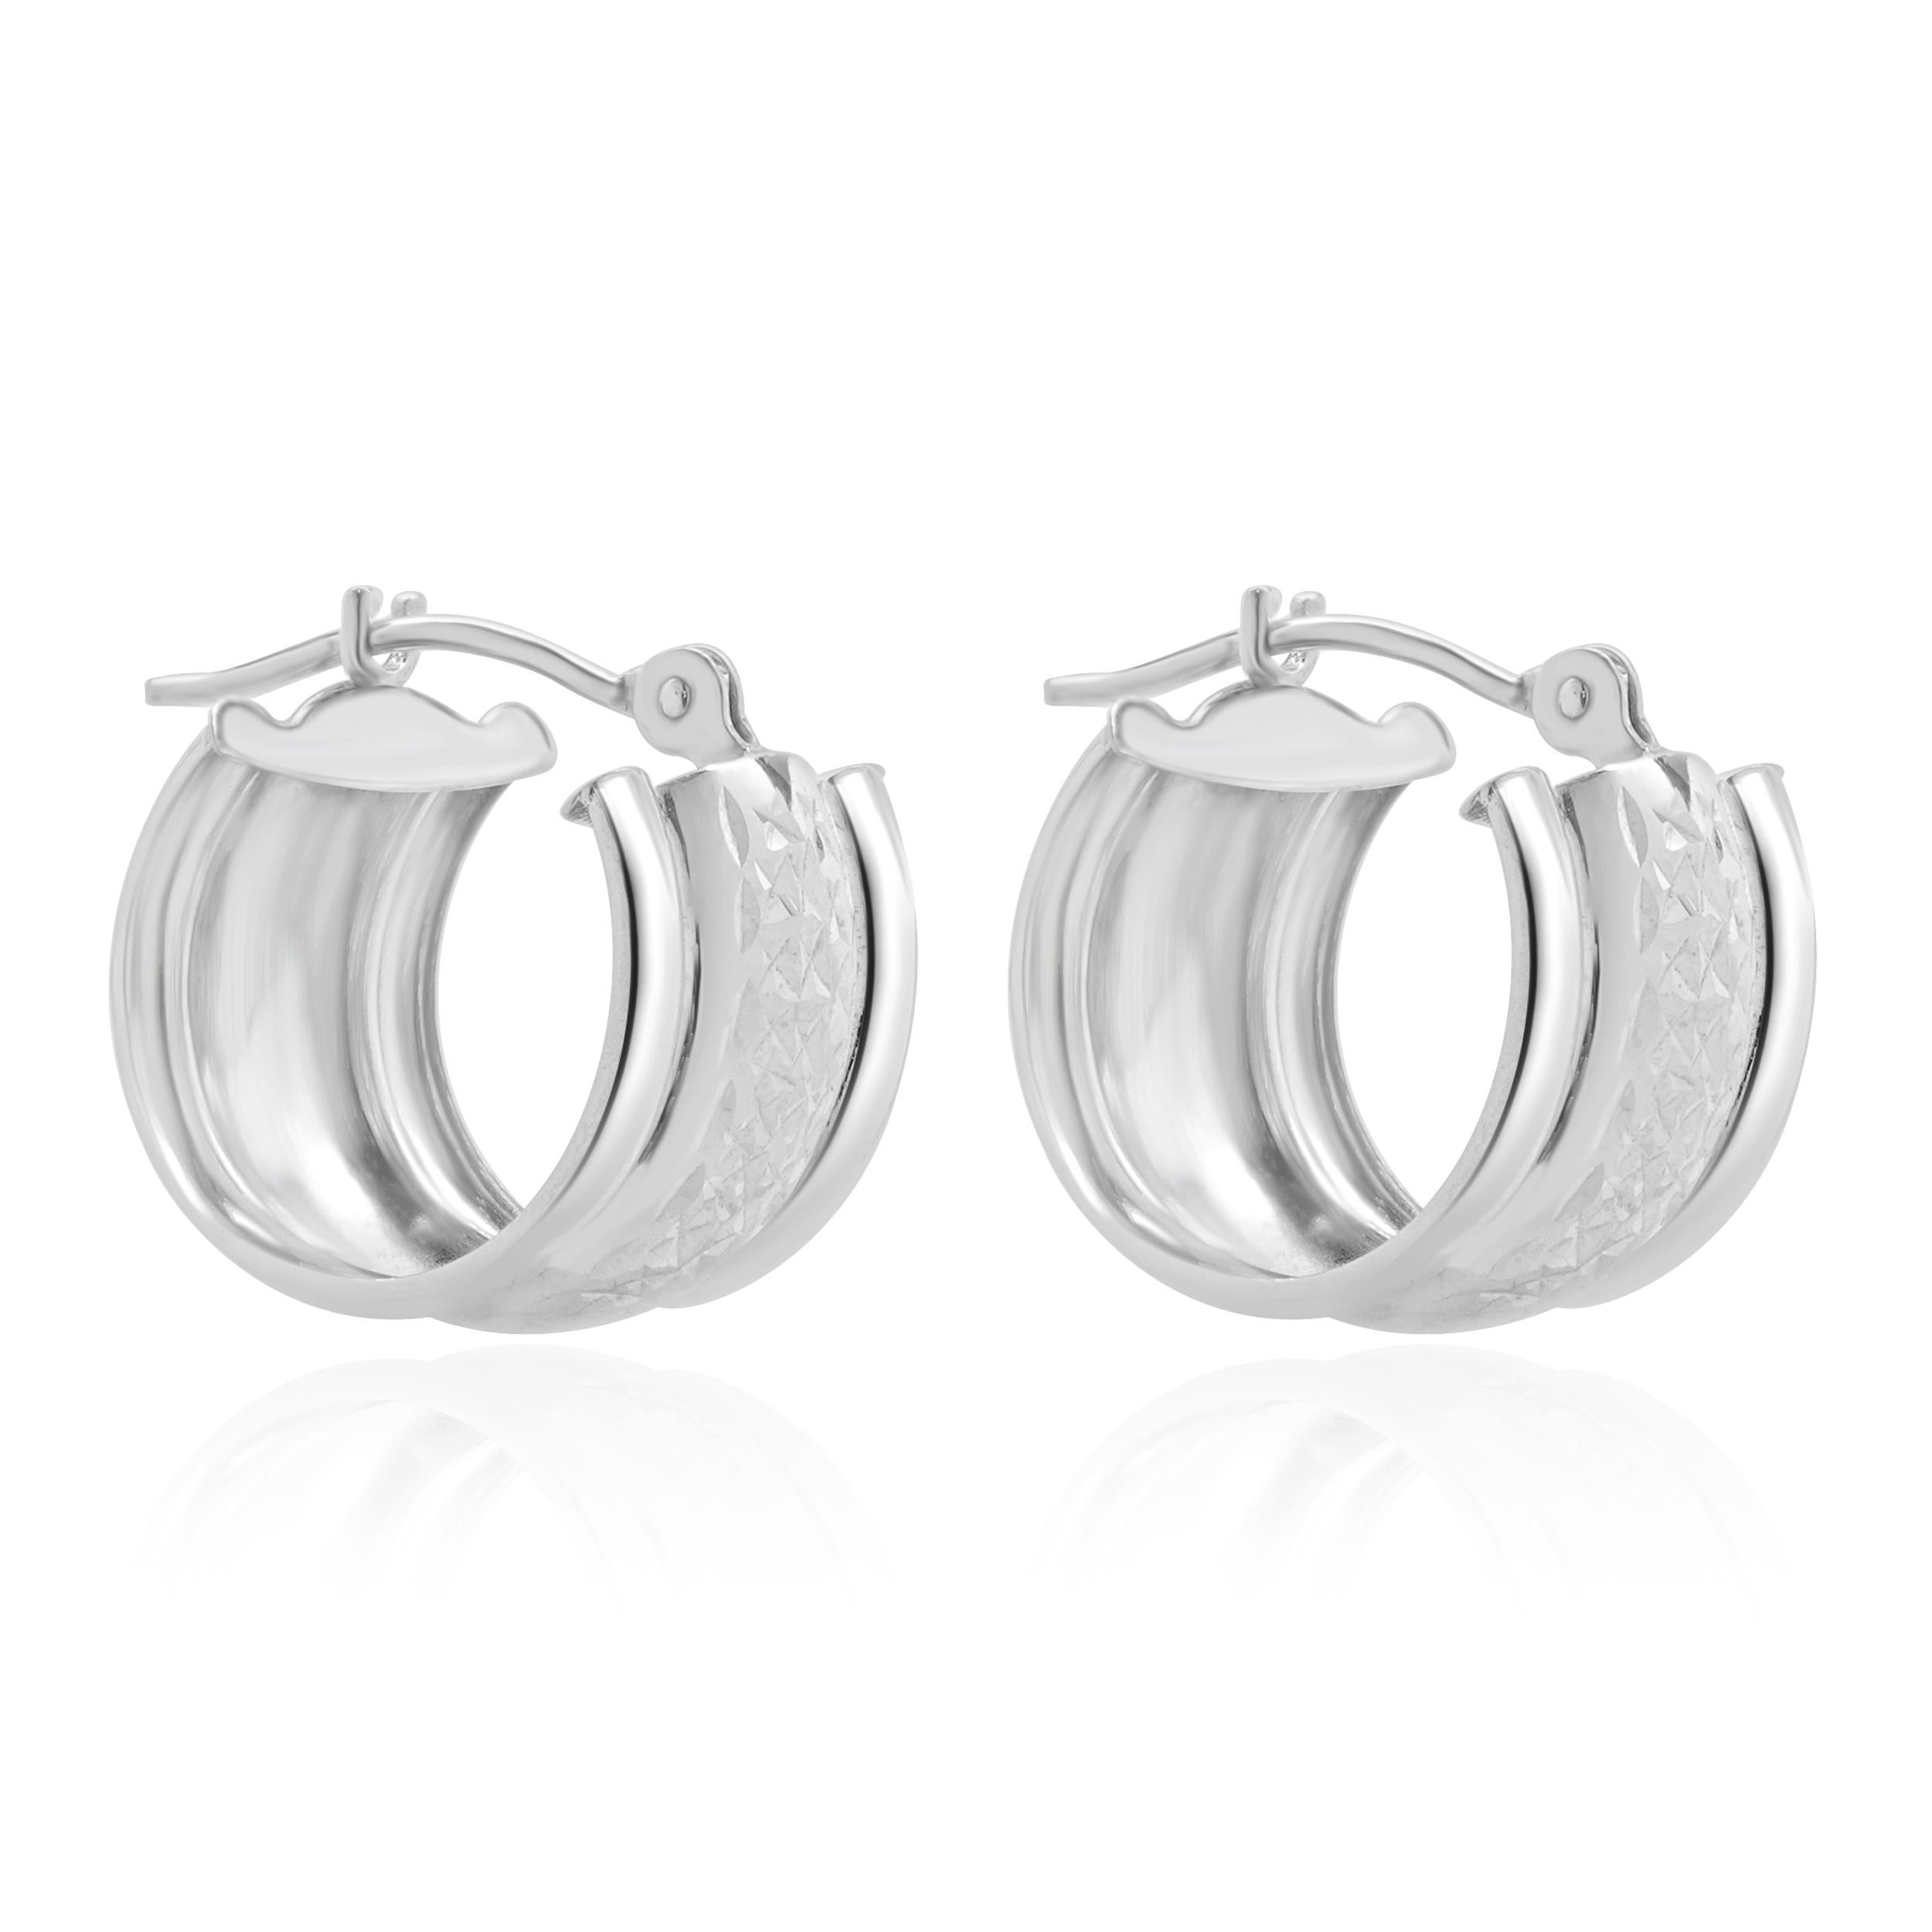 Material: 14K white gold
Dimensions: earrings measure 14.2mm
Weight:  1.45 grams
